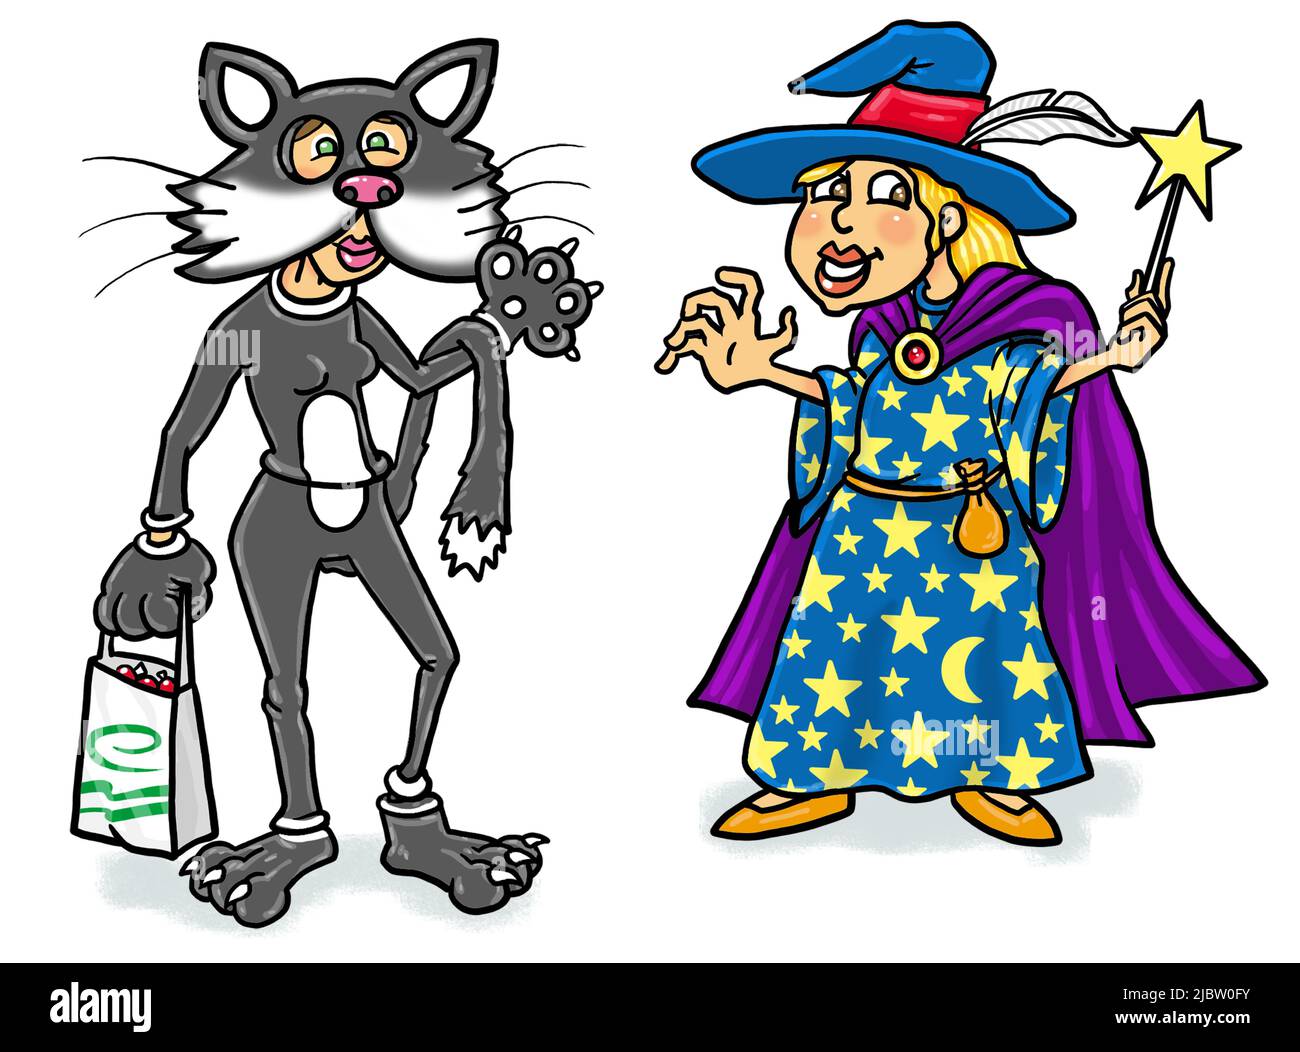 Cartoon art, two children dressed up in Halloween costumes fancy dress ready to go trick or treating, festive fun, seasonal events, playing dress-up. Stock Photo